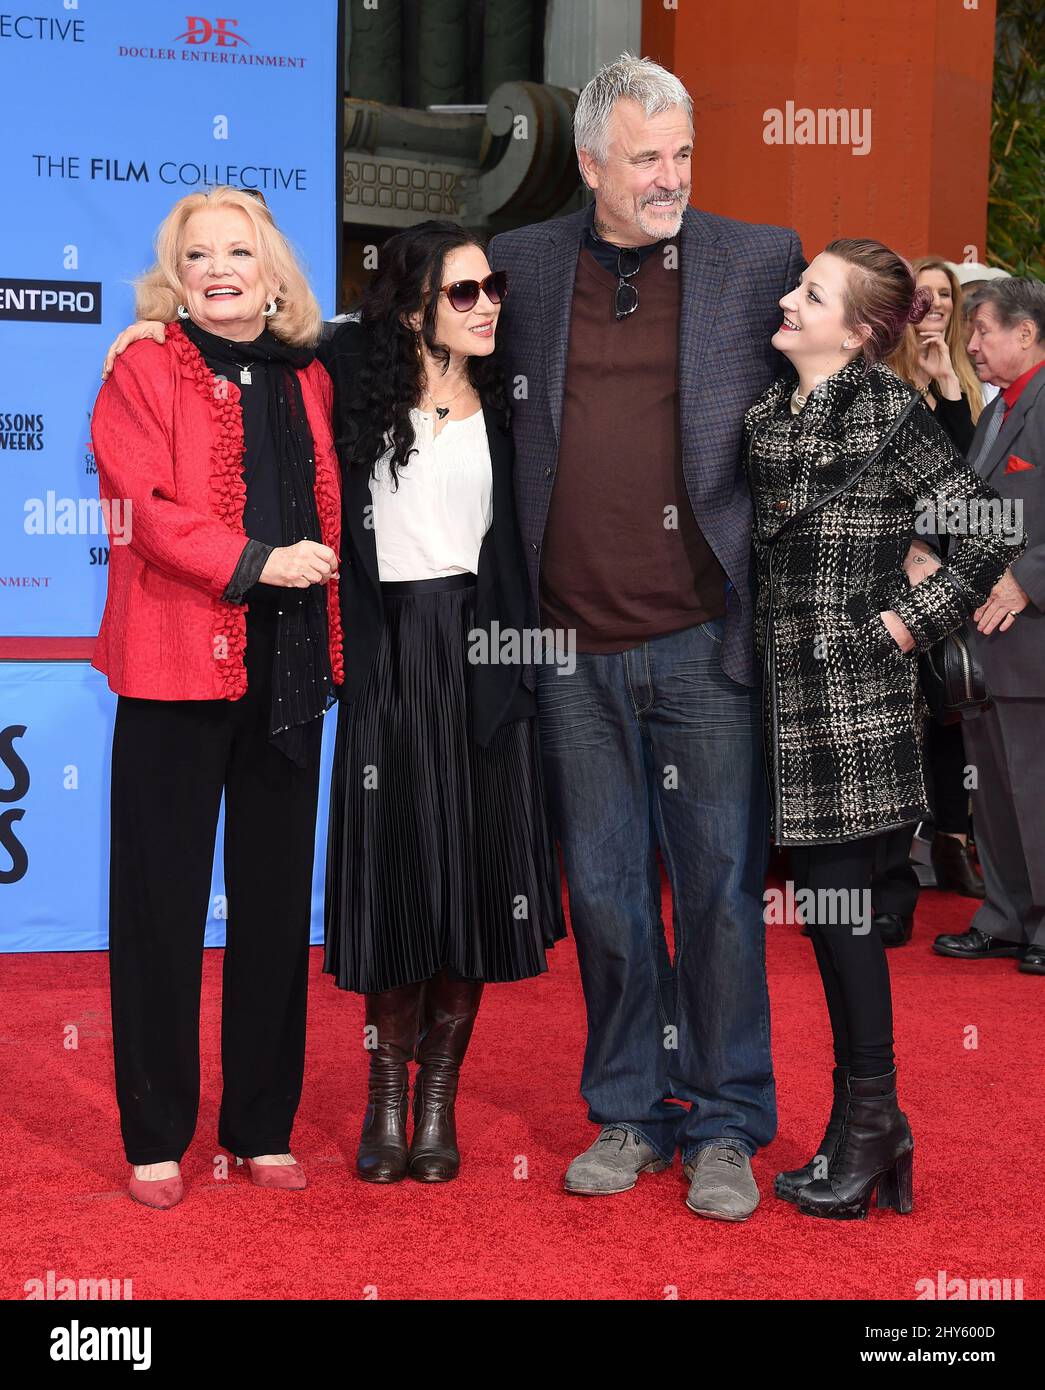 Gena Rowlands, Alexandra Cassavetes, Nick Cassavetes and Xan Cassavetes at the Gena Rowlands Handprint and Footprint Ceremony at the TCL Chinese Theatre IMAX forecourt in Los Angeles, USA. Stock Photo